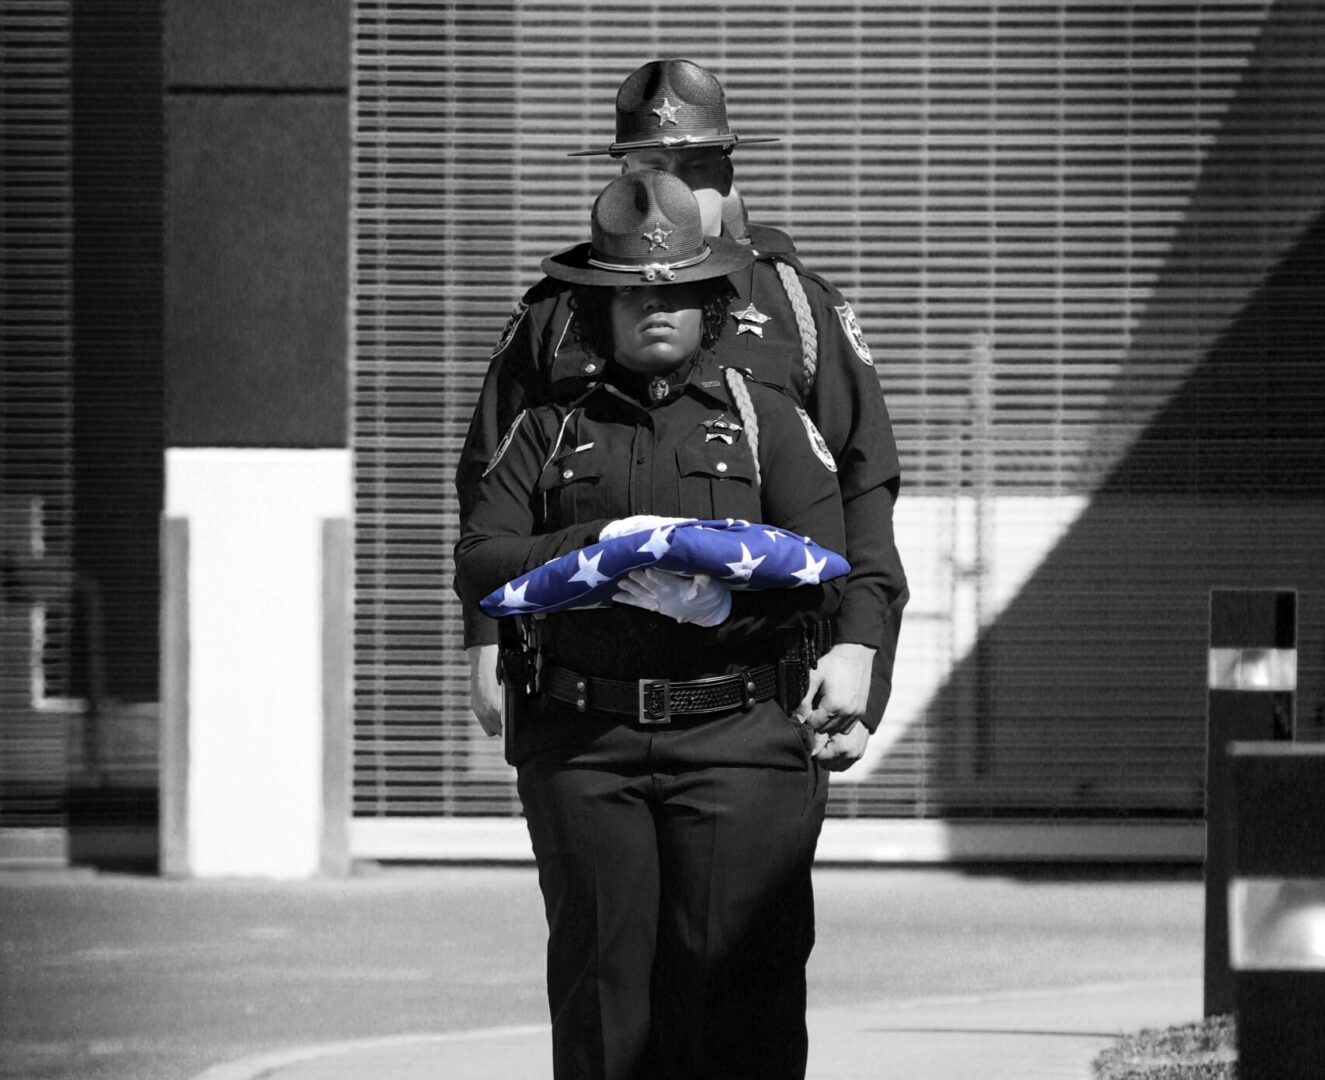 A police officer in uniform solemnly carrying a folded american flag.